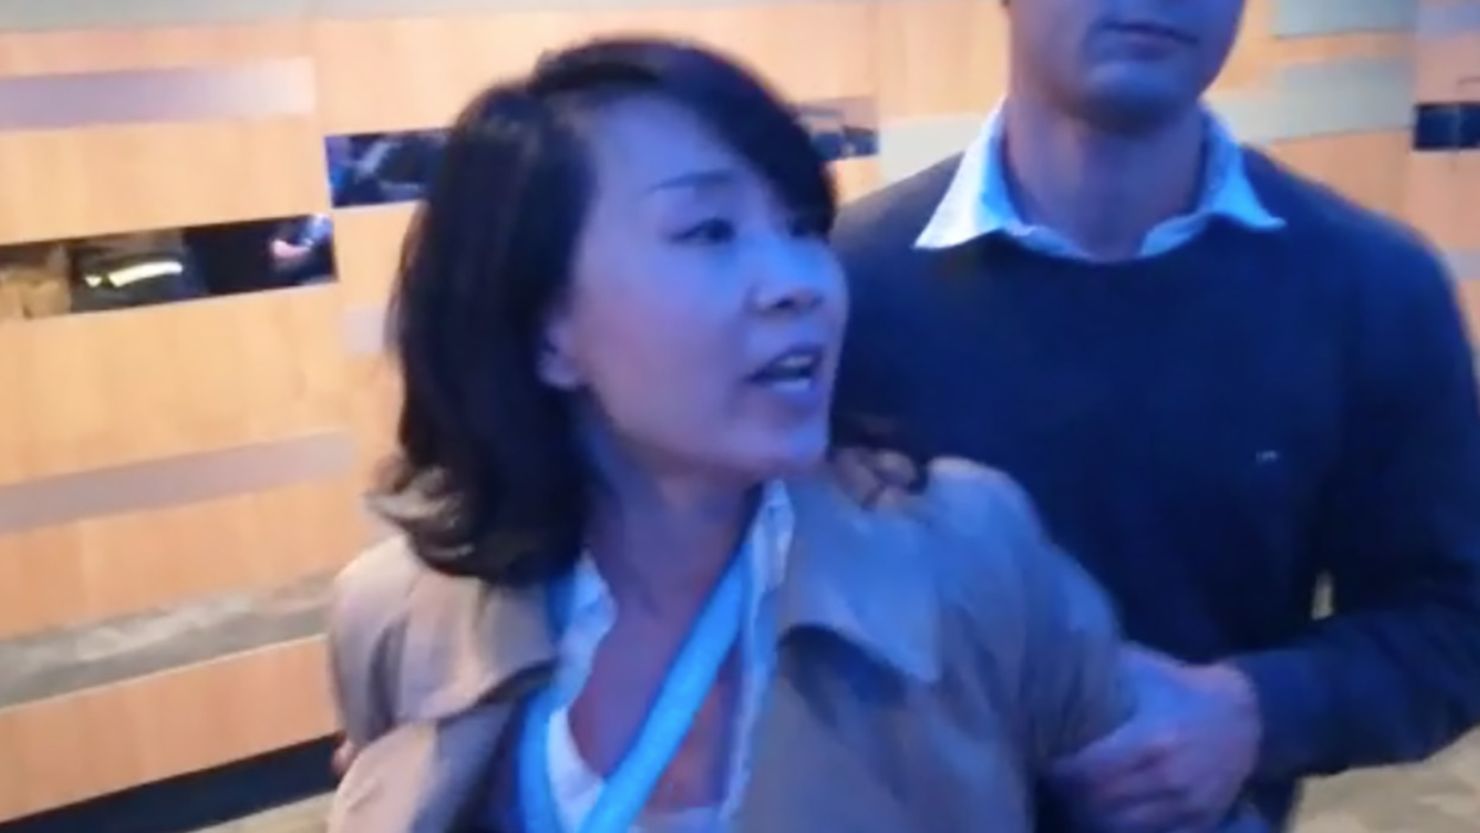 Kong Linlin was removed from a Hong Kong event at the UK Conservative Conference in September after allegedly assaulting a volunteer and loudly protesting a speaker.